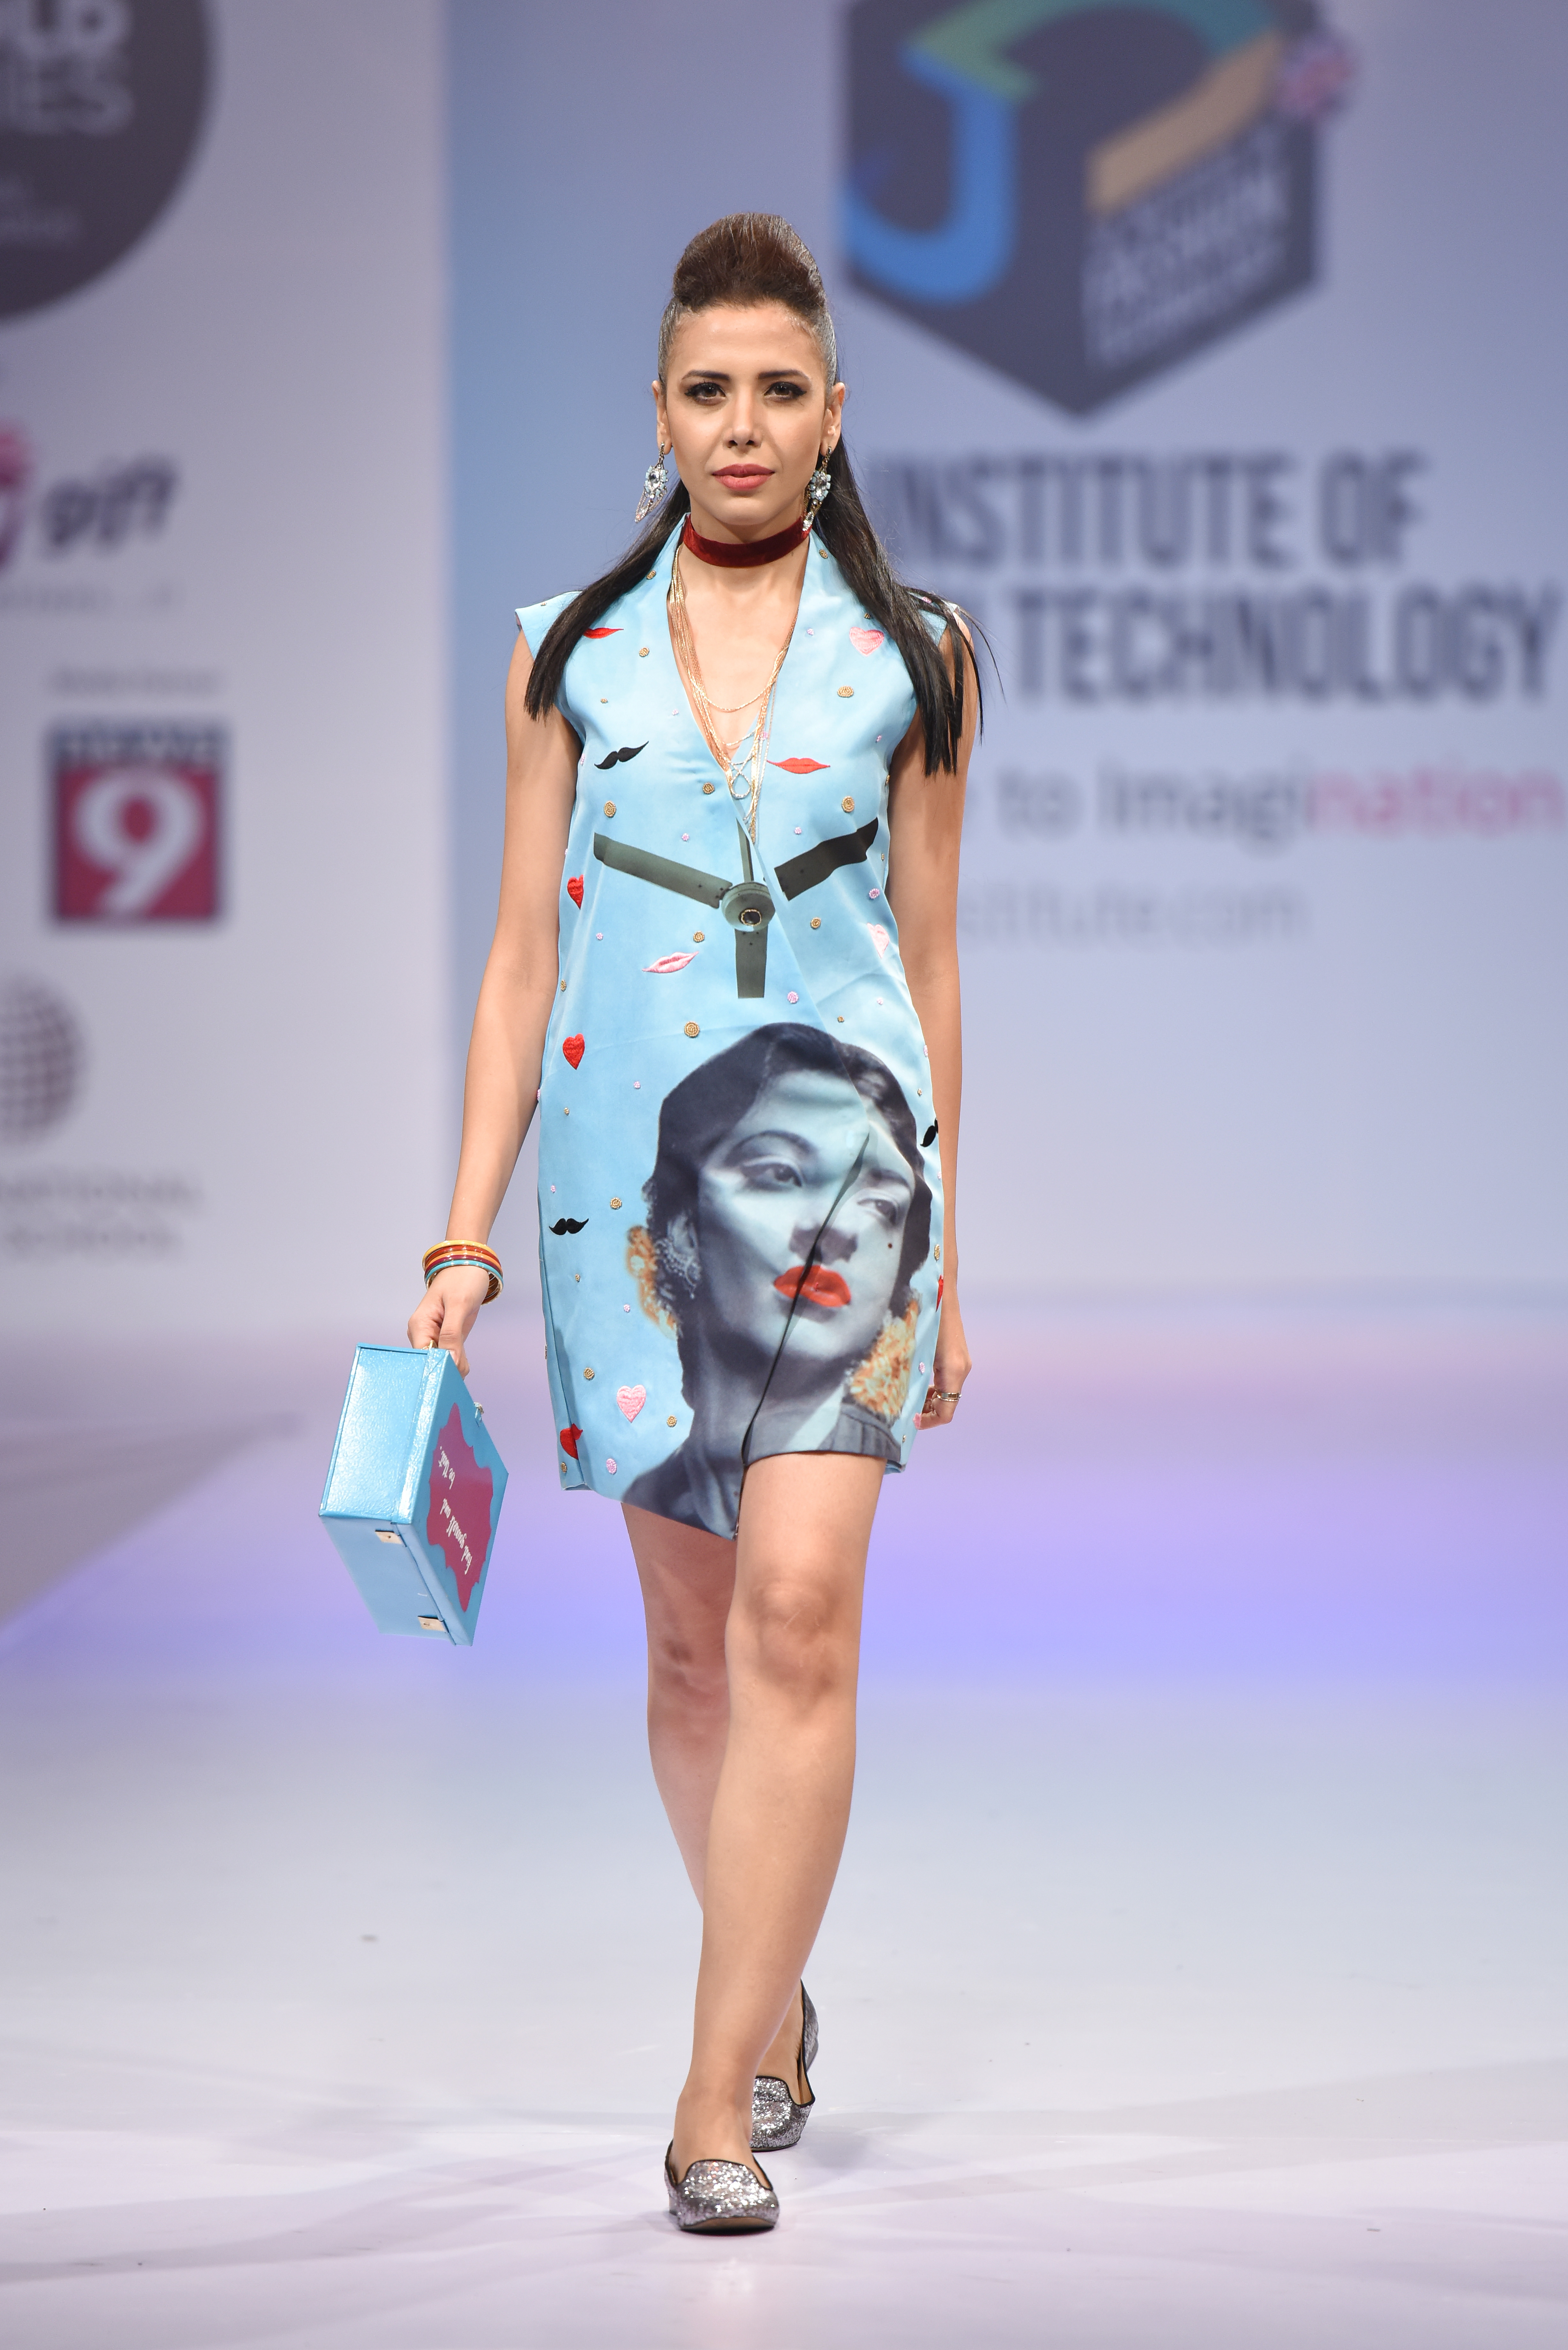 JD Institute of Fashion Technology's 28th Annual Design Awards